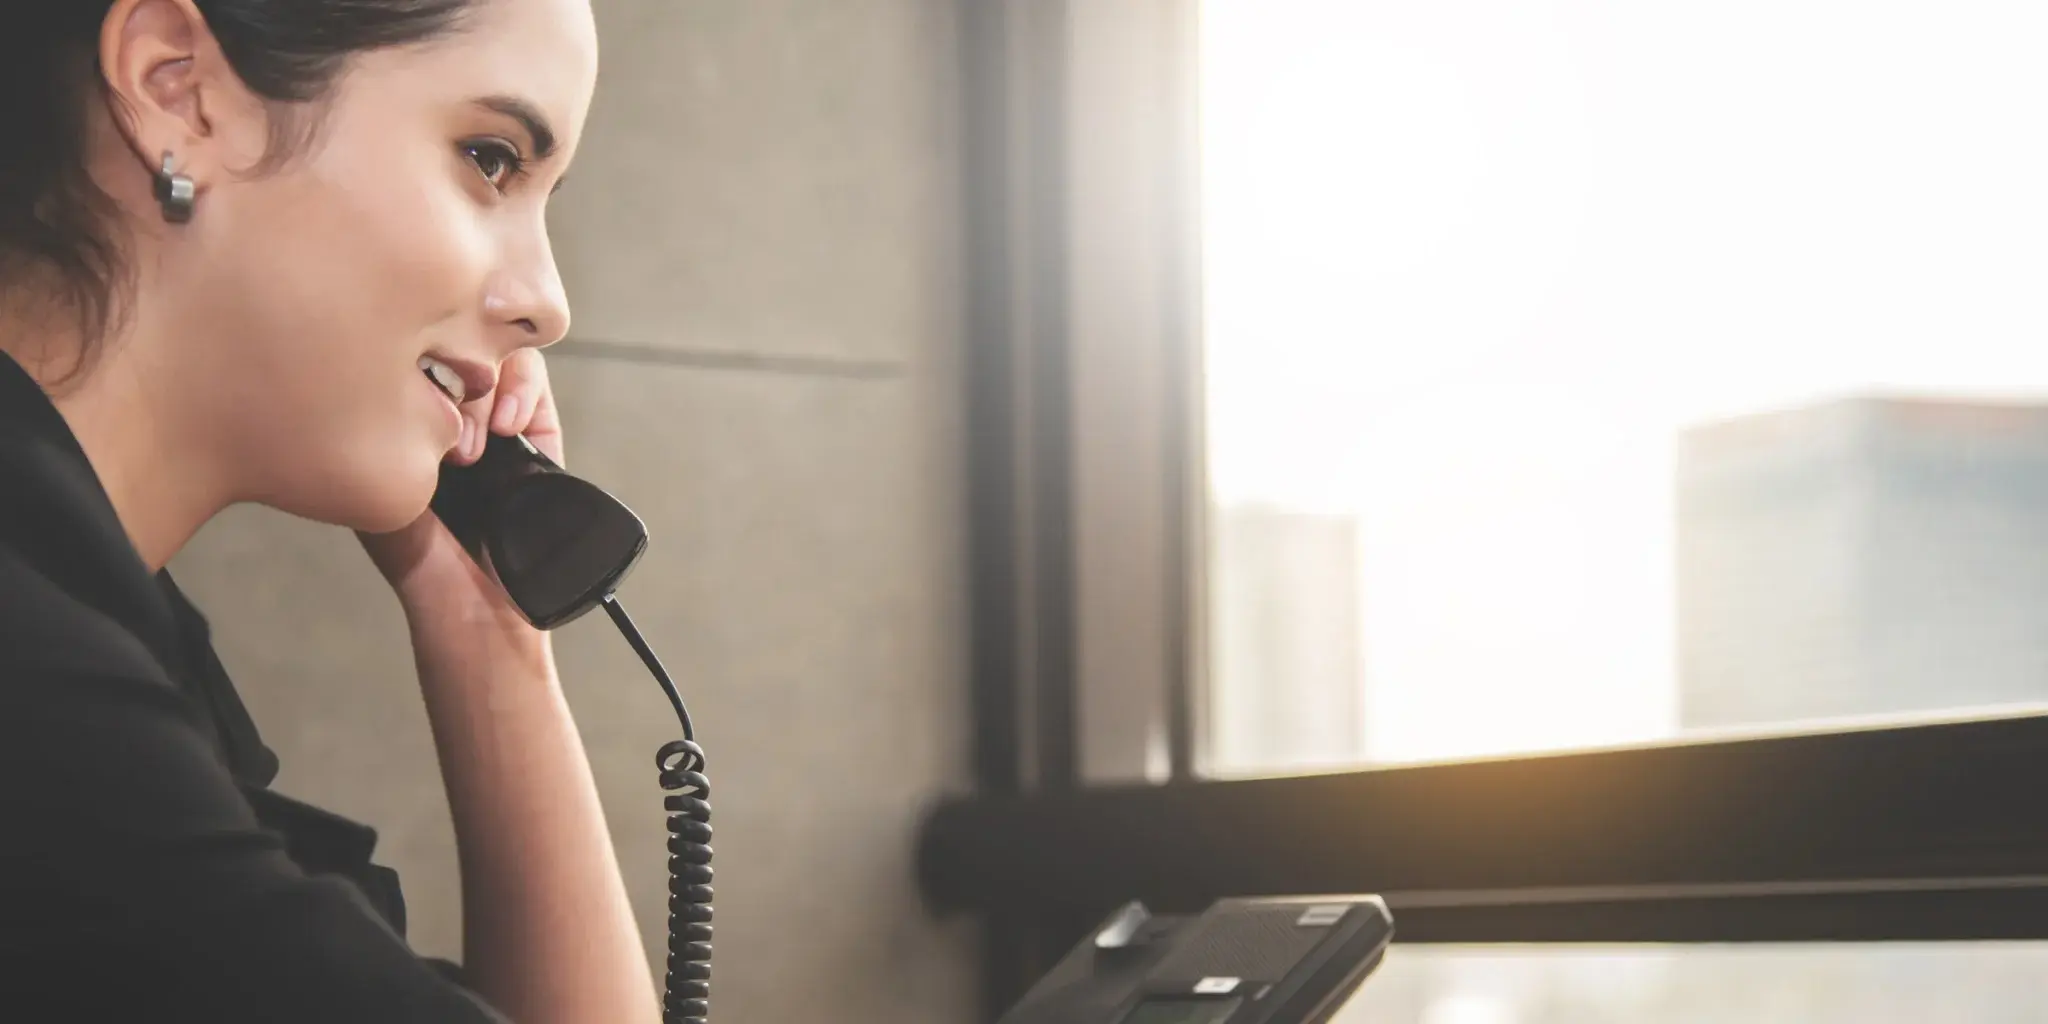 A young Caucasian woman in a black dress shirt is talking on a black corded telephone.